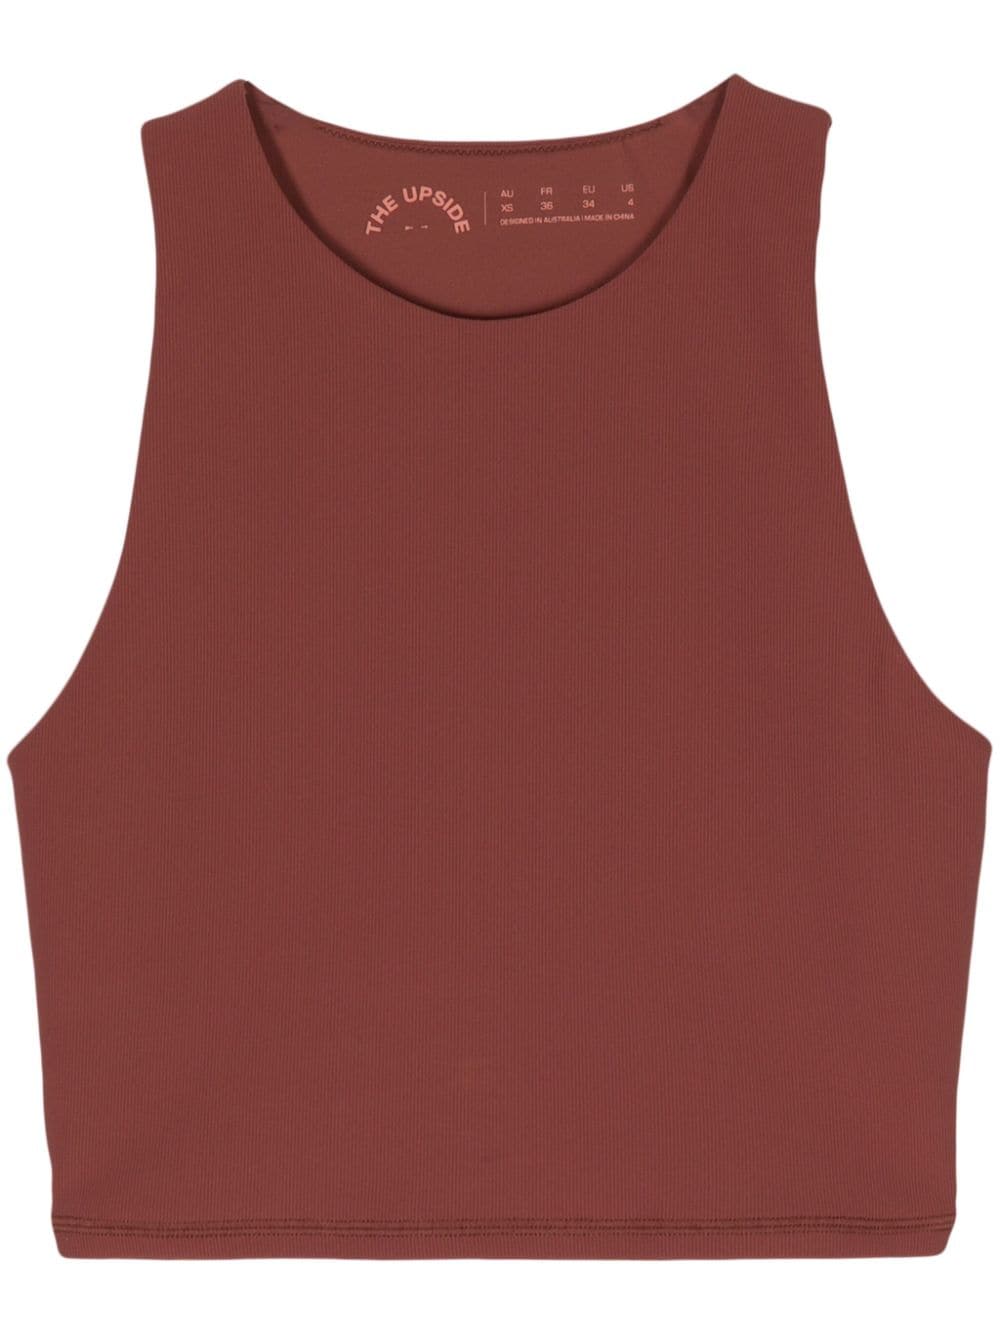 The Upside Jacinta Ribbed Cropped Performance Tank Top In Brown